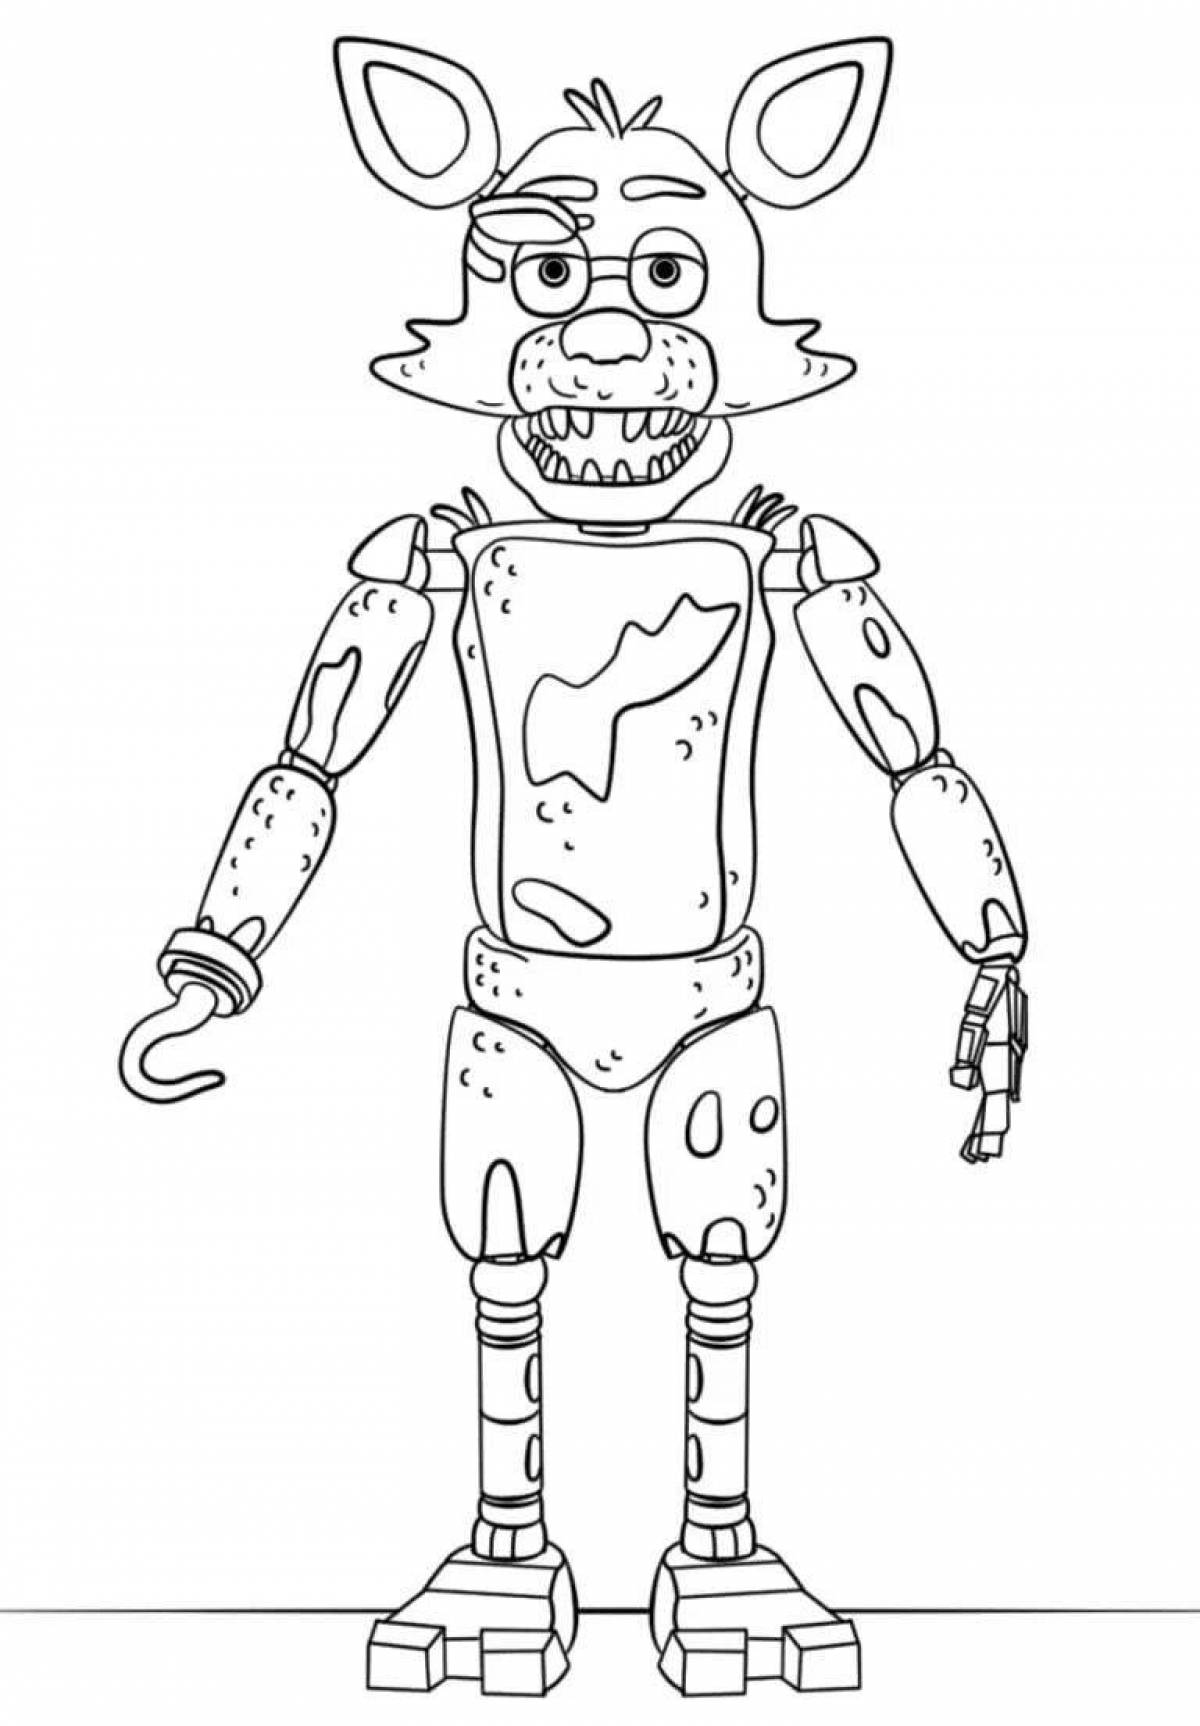 Awesome fnaf foxy coloring book